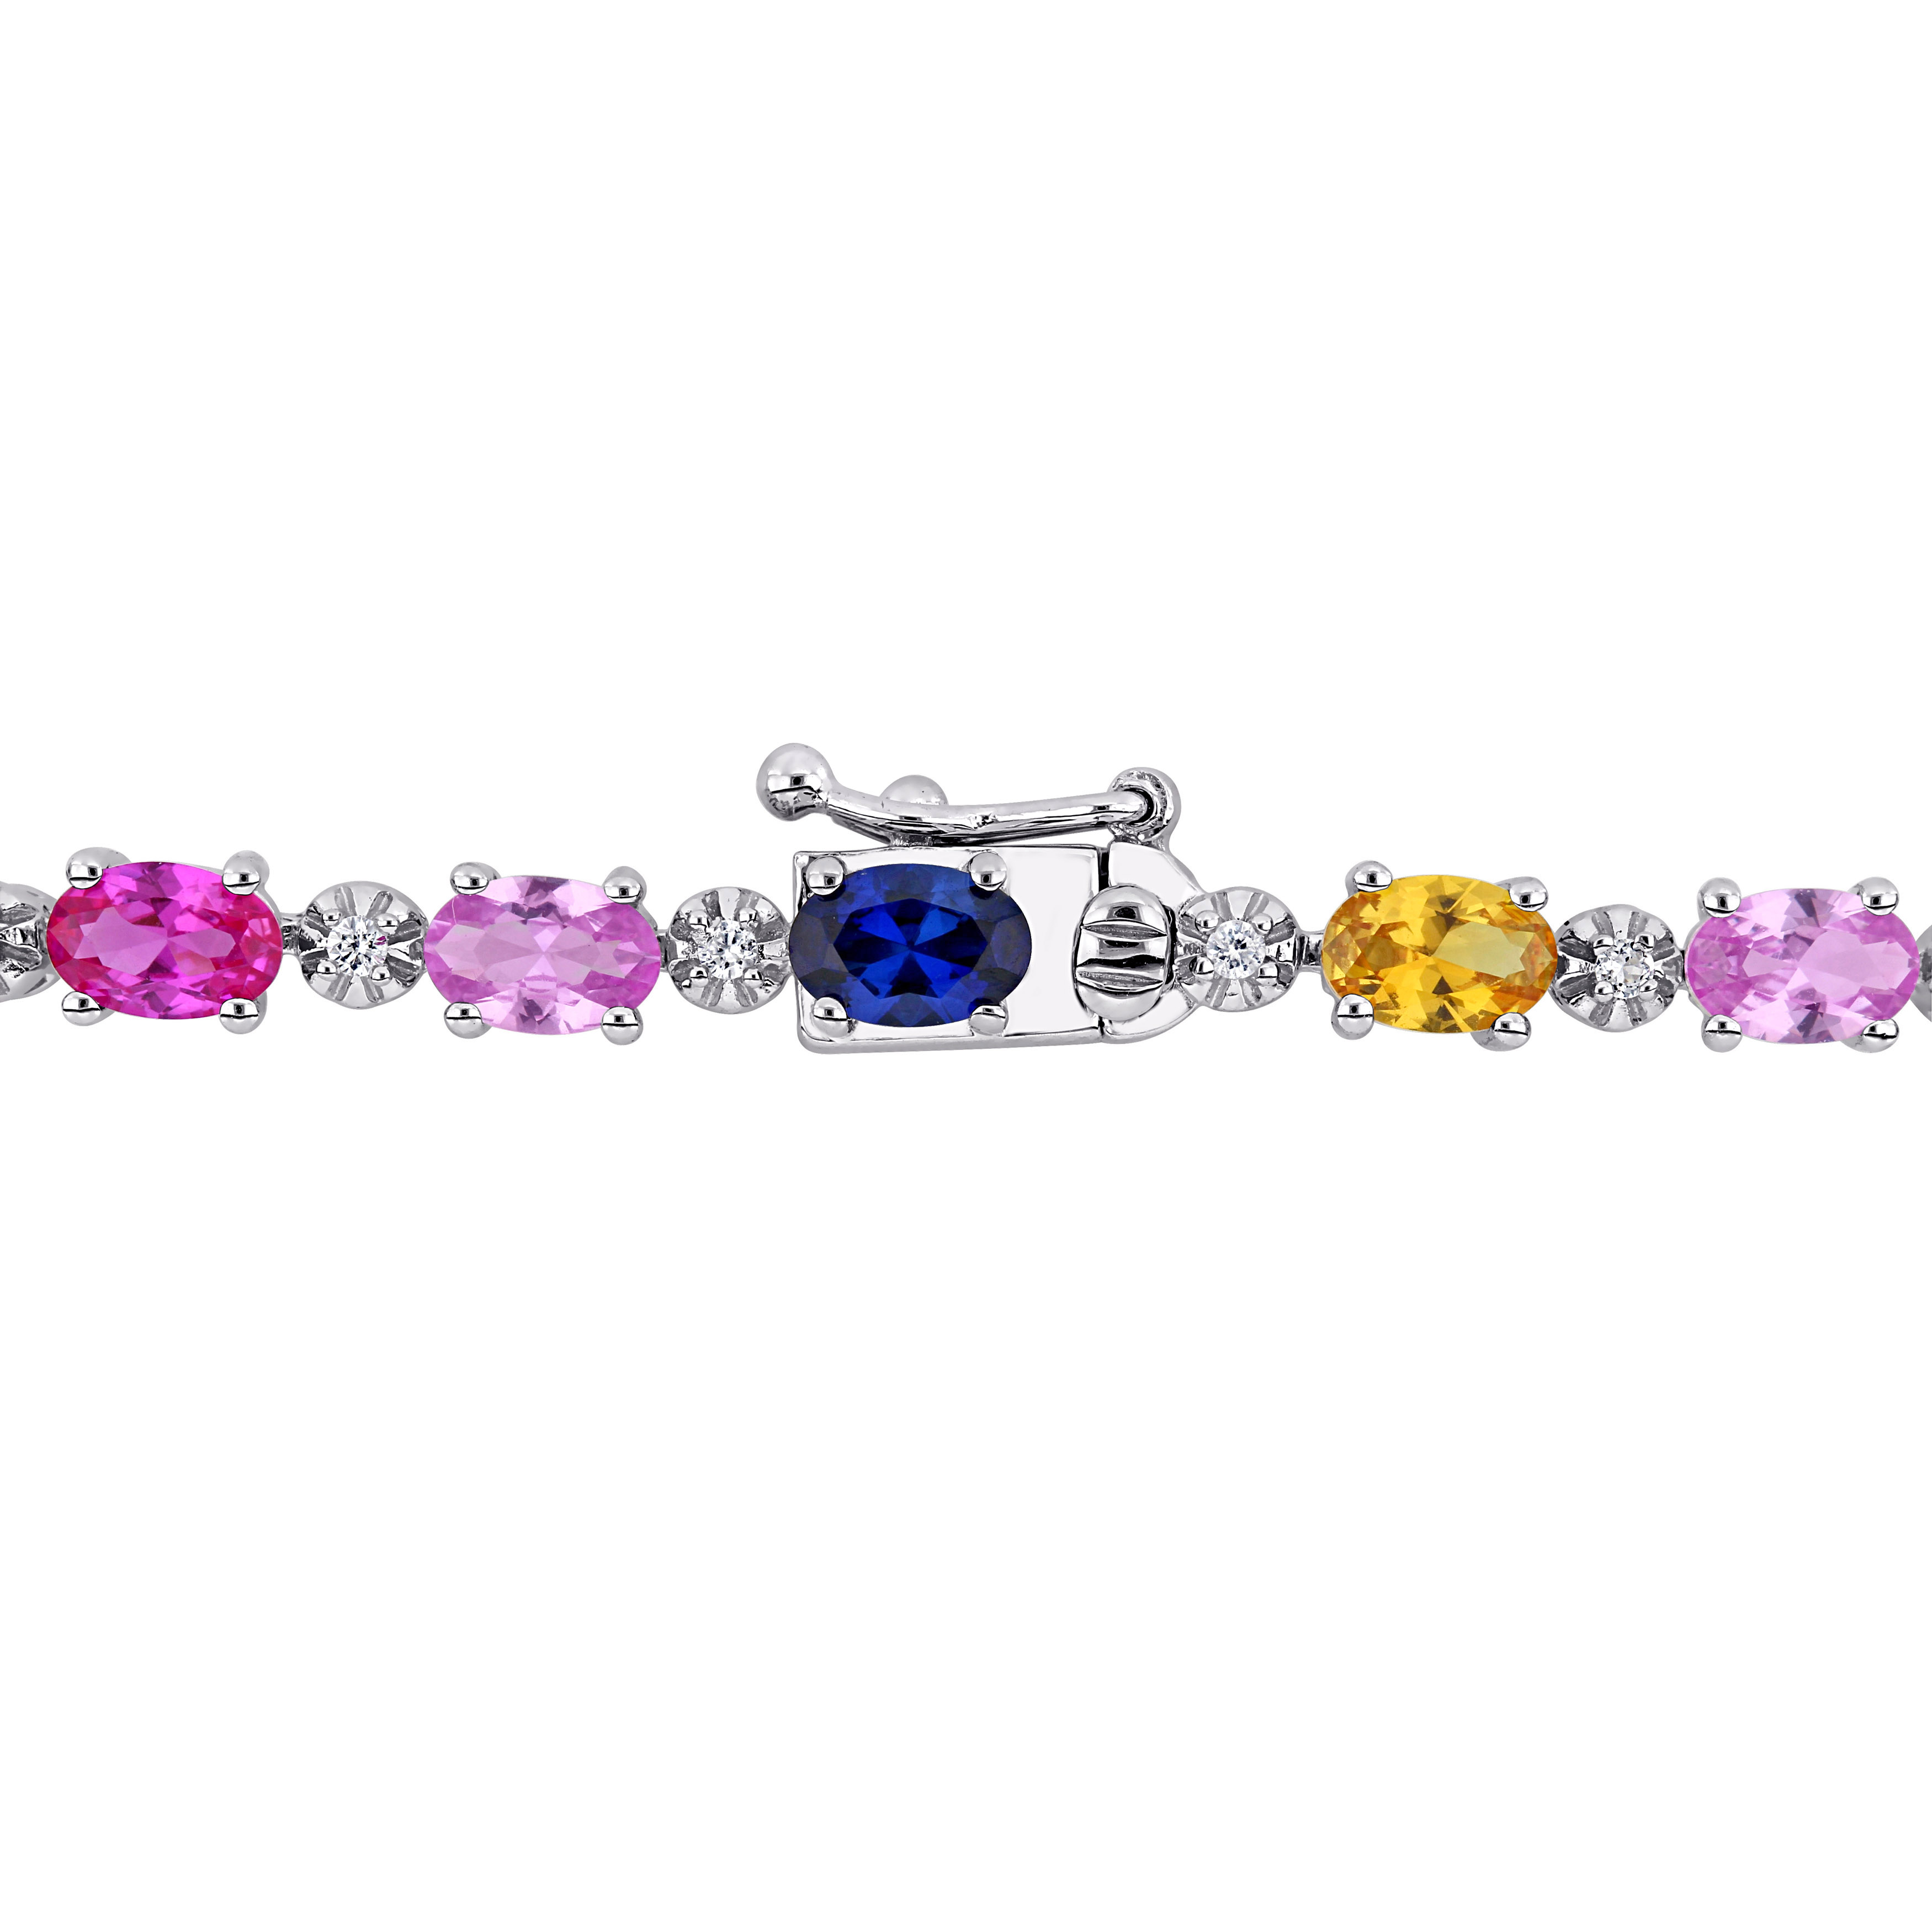 10 1/4 CT TGW Multi-Color Created Sapphire Tennis Bracelet in Sterling Silver - 7 in.